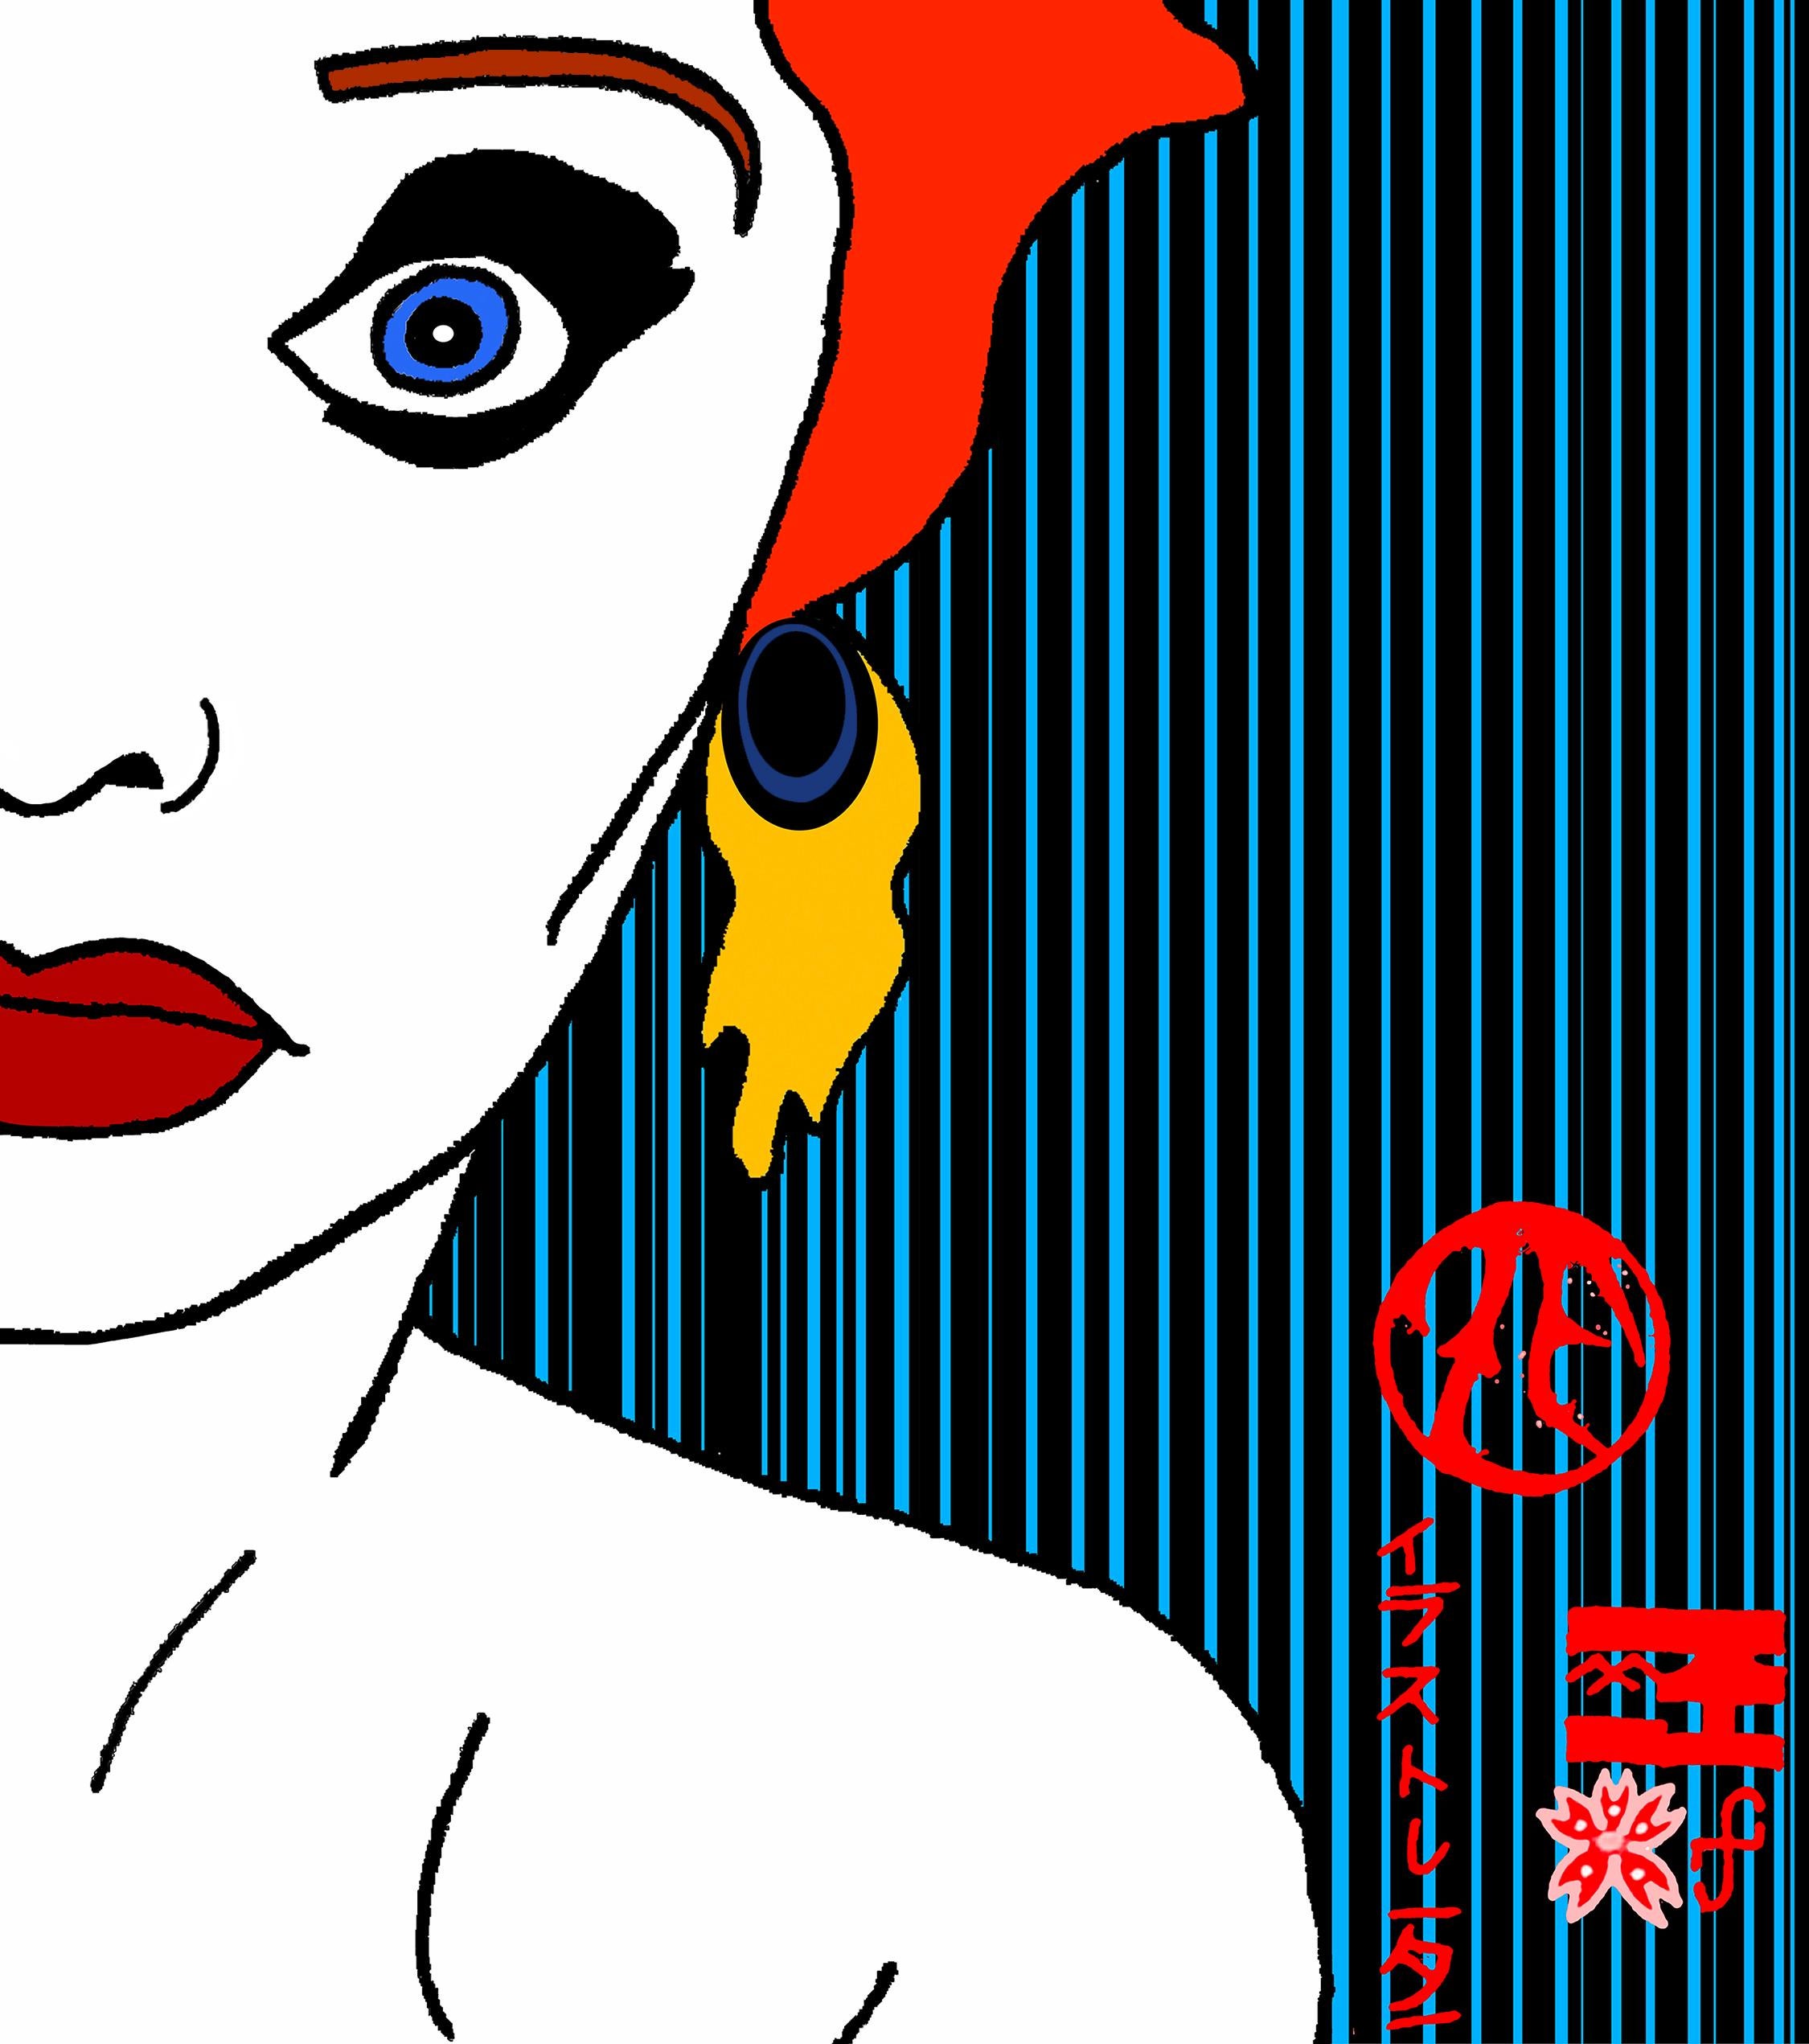 Contemporary Pop Art Screenprint on canvas, created in 2020.  Artist Zane Fix portrait of Lucille Ball embellished with some of his most iconic graphics.  No. 1 of 20.

Ink on 40 x 30.75 inch canvas. Limited Edition signed and numbered by the